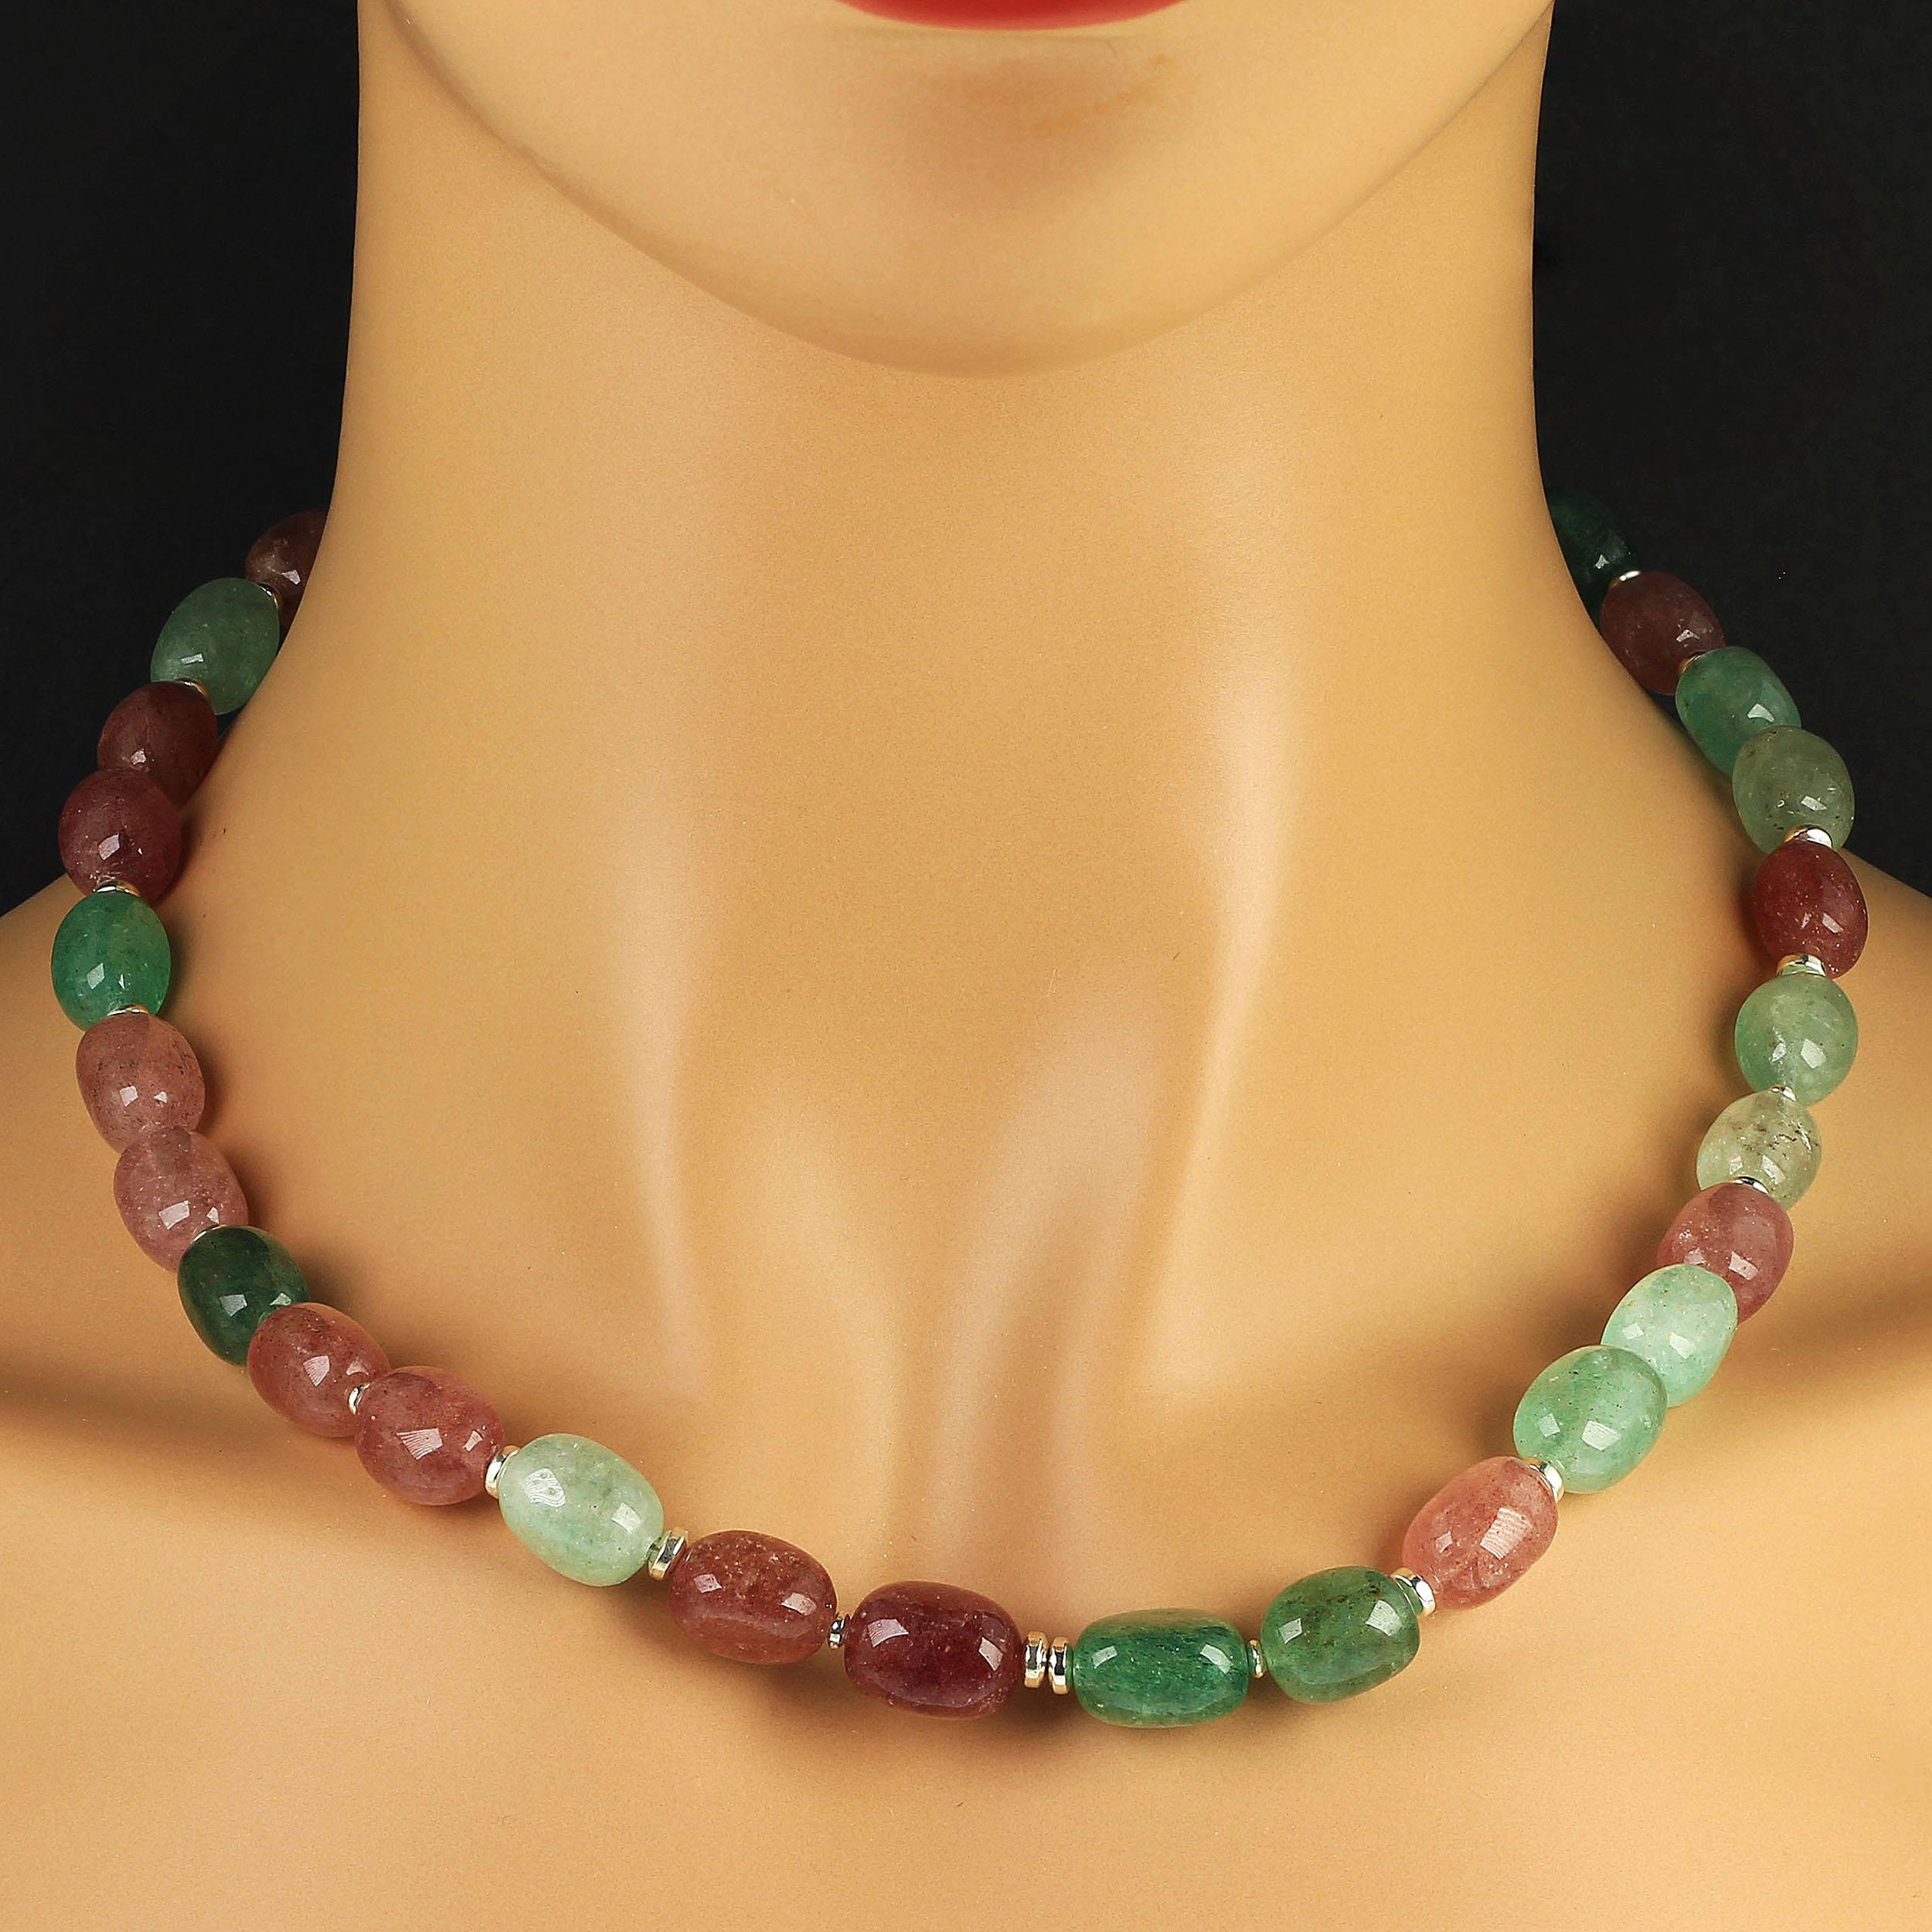 19 inch necklace